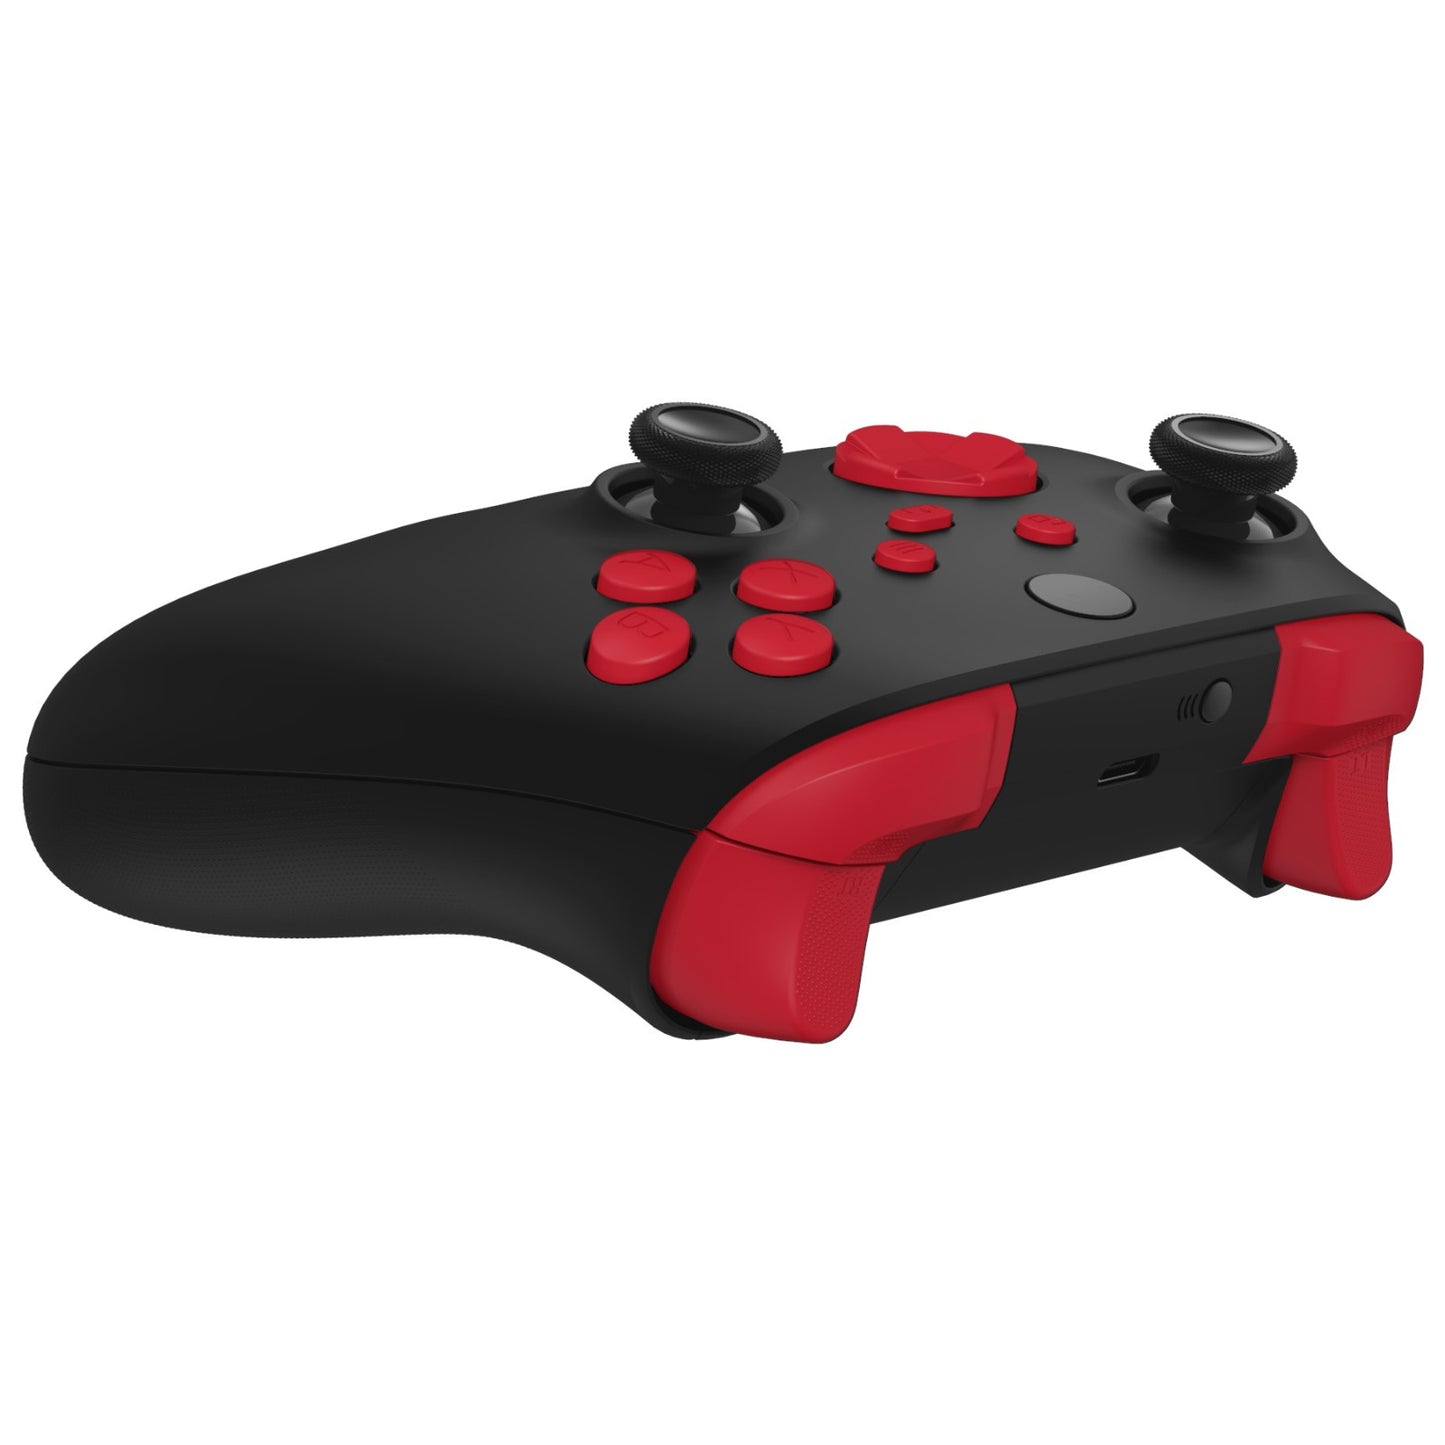 eXtremeRate Retail Passion Red Replacement Buttons for Xbox Series S & Xbox Series X Controller, LB RB LT RT Bumpers Triggers D-pad ABXY Start Back Sync Share Keys for Xbox Series X/S Controller - JX3116